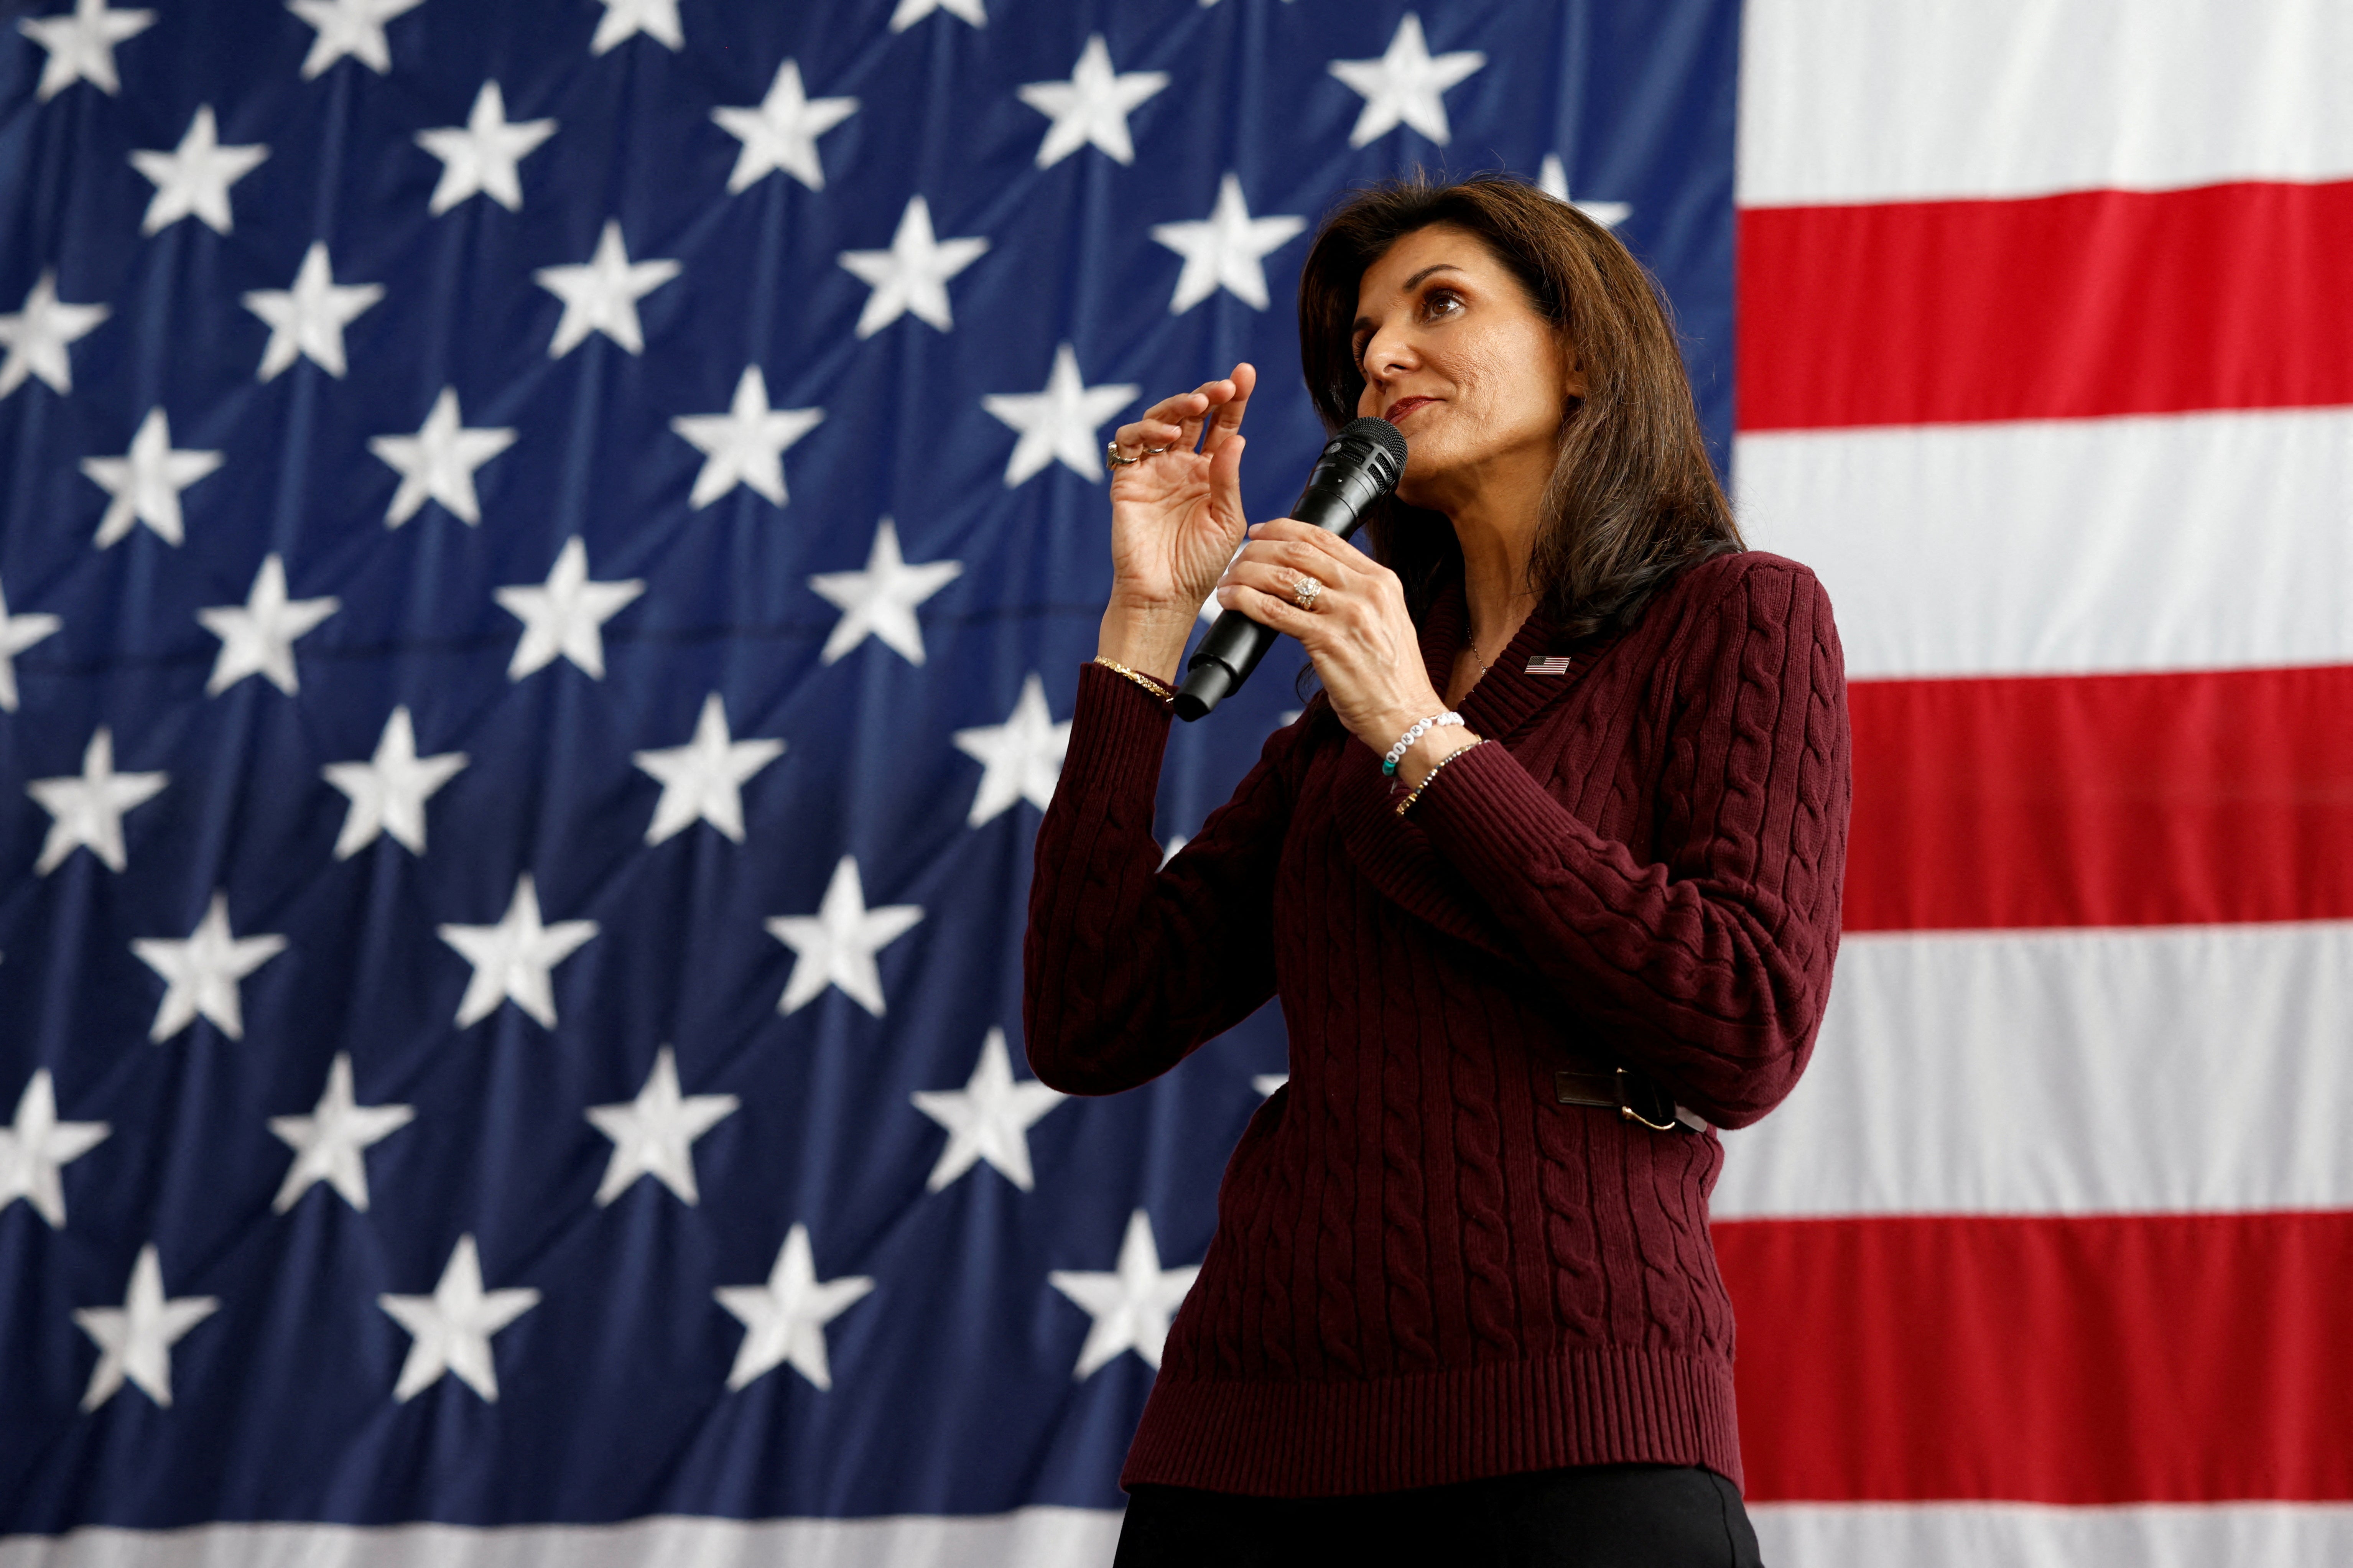 Nikki Haley at a campaign event on 2 March